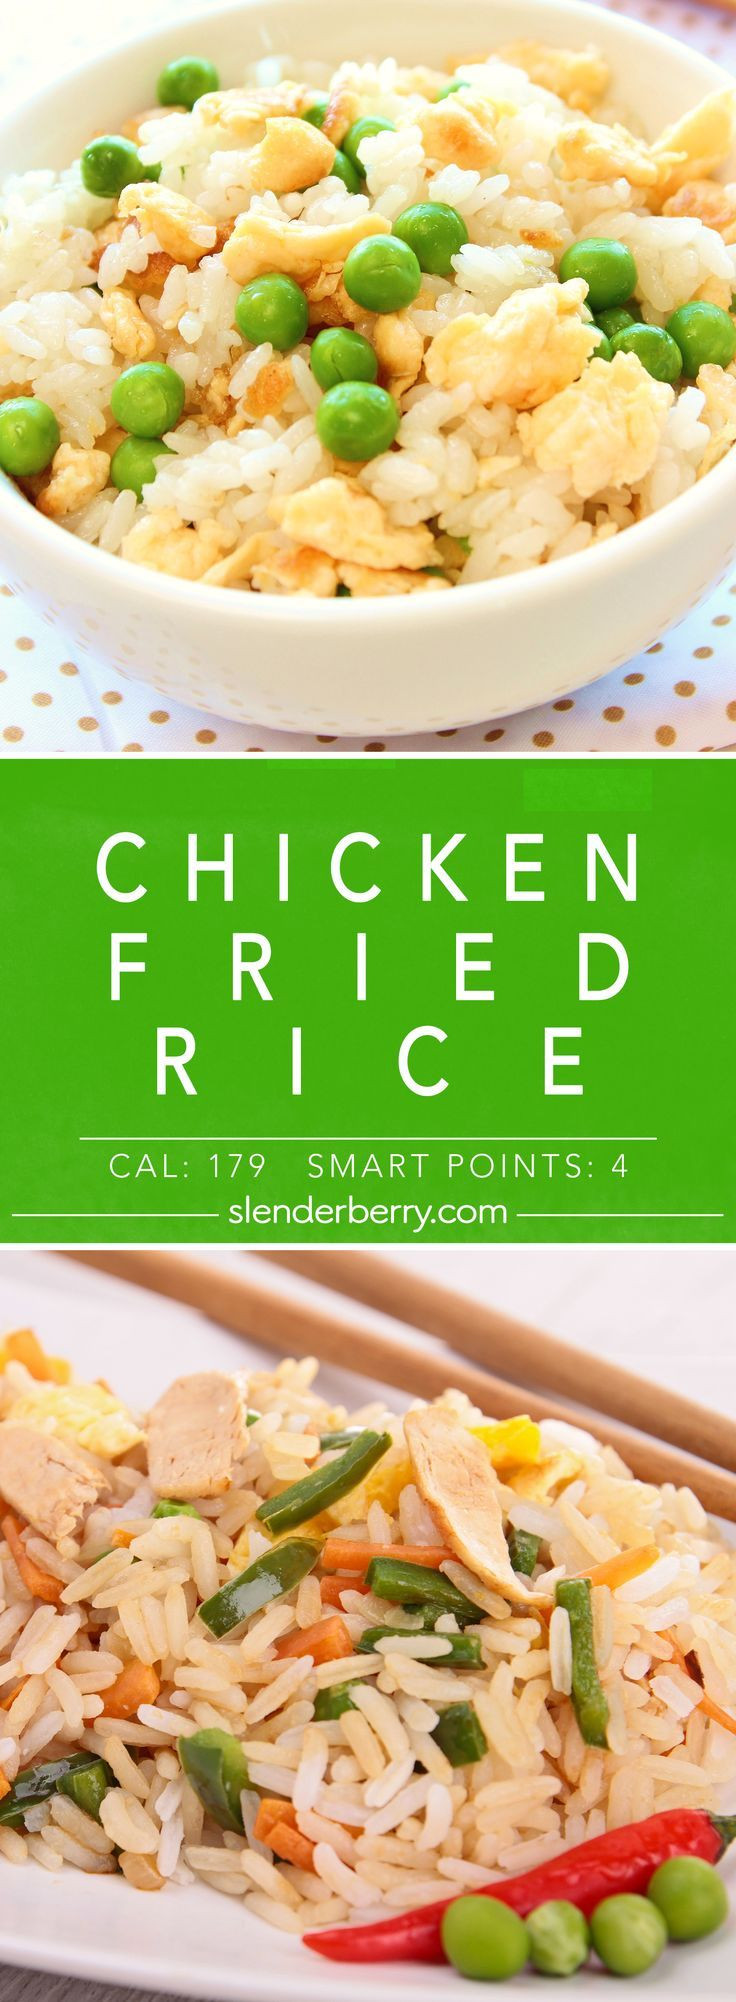 Low Fat Chicken And Rice Recipes
 Chicken Fried Rice Recipe in 2020